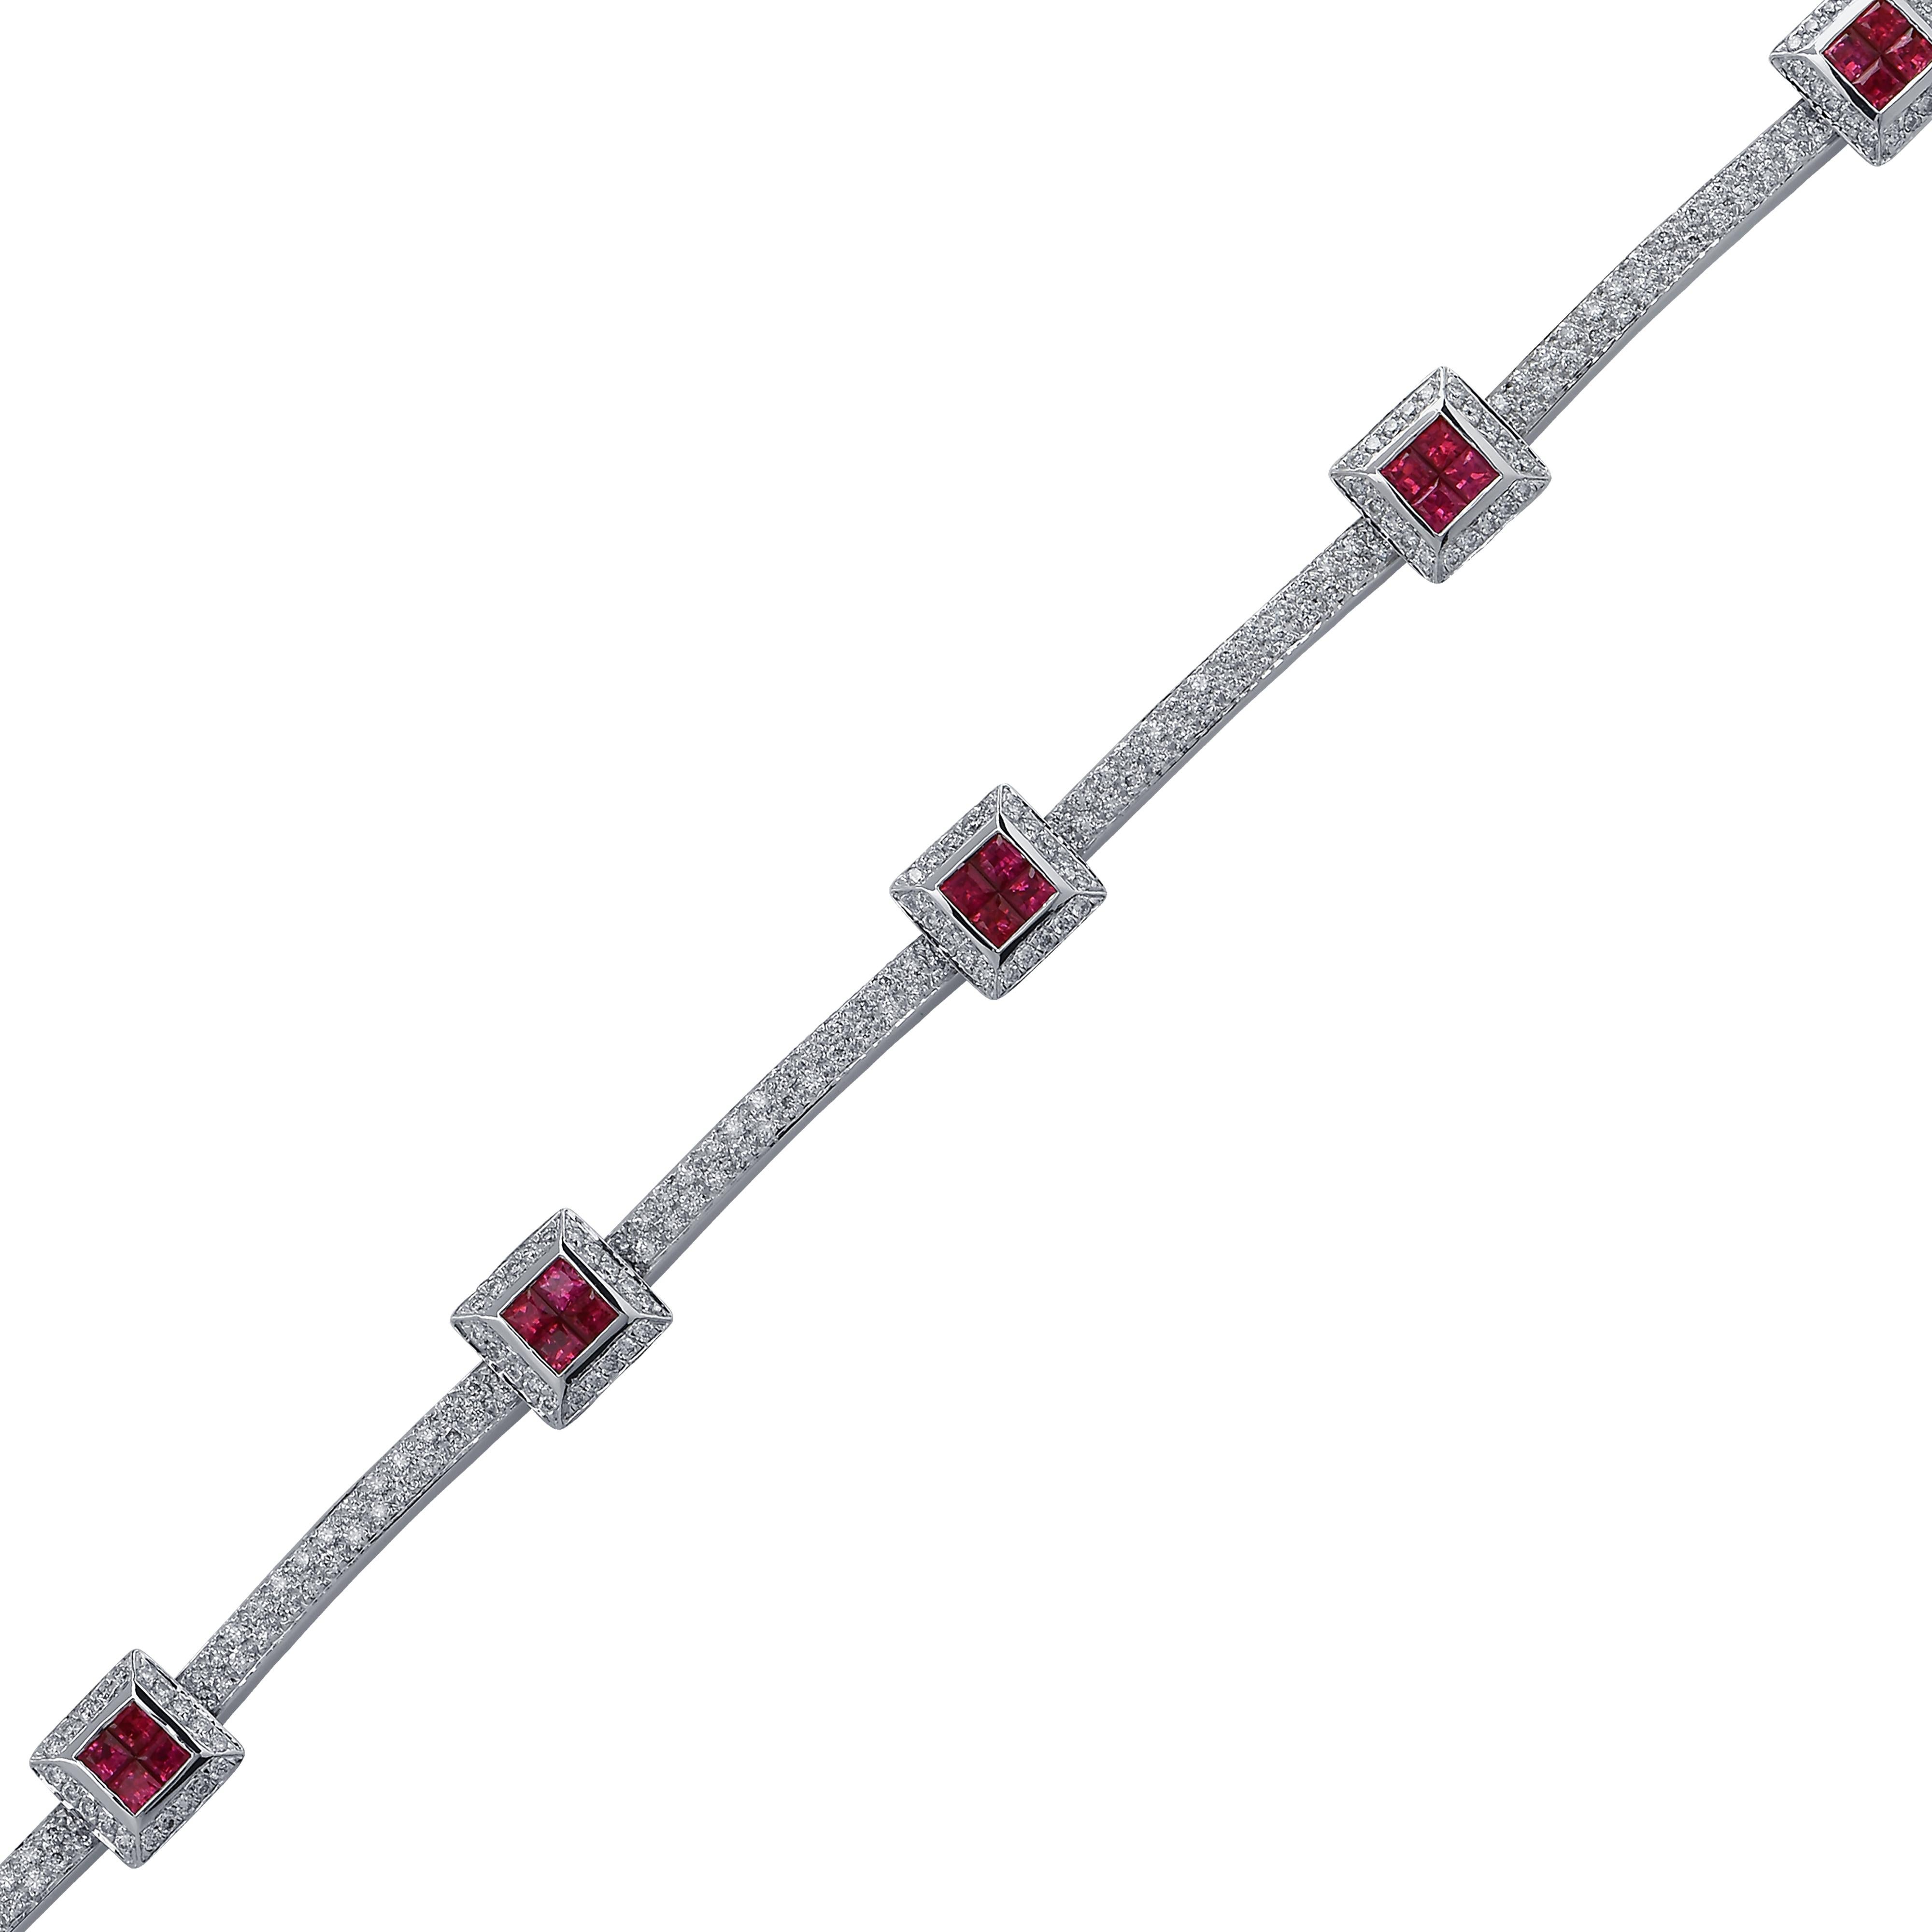 Stunning bracelet crafted in 18 karat white gold featuring 24 square cut rubies weighing approximately 1 carat total, accented by 284 round brilliant cut diamonds weighing approximately 1.5 carats total, G color VS clarity. Six squares, invisibly